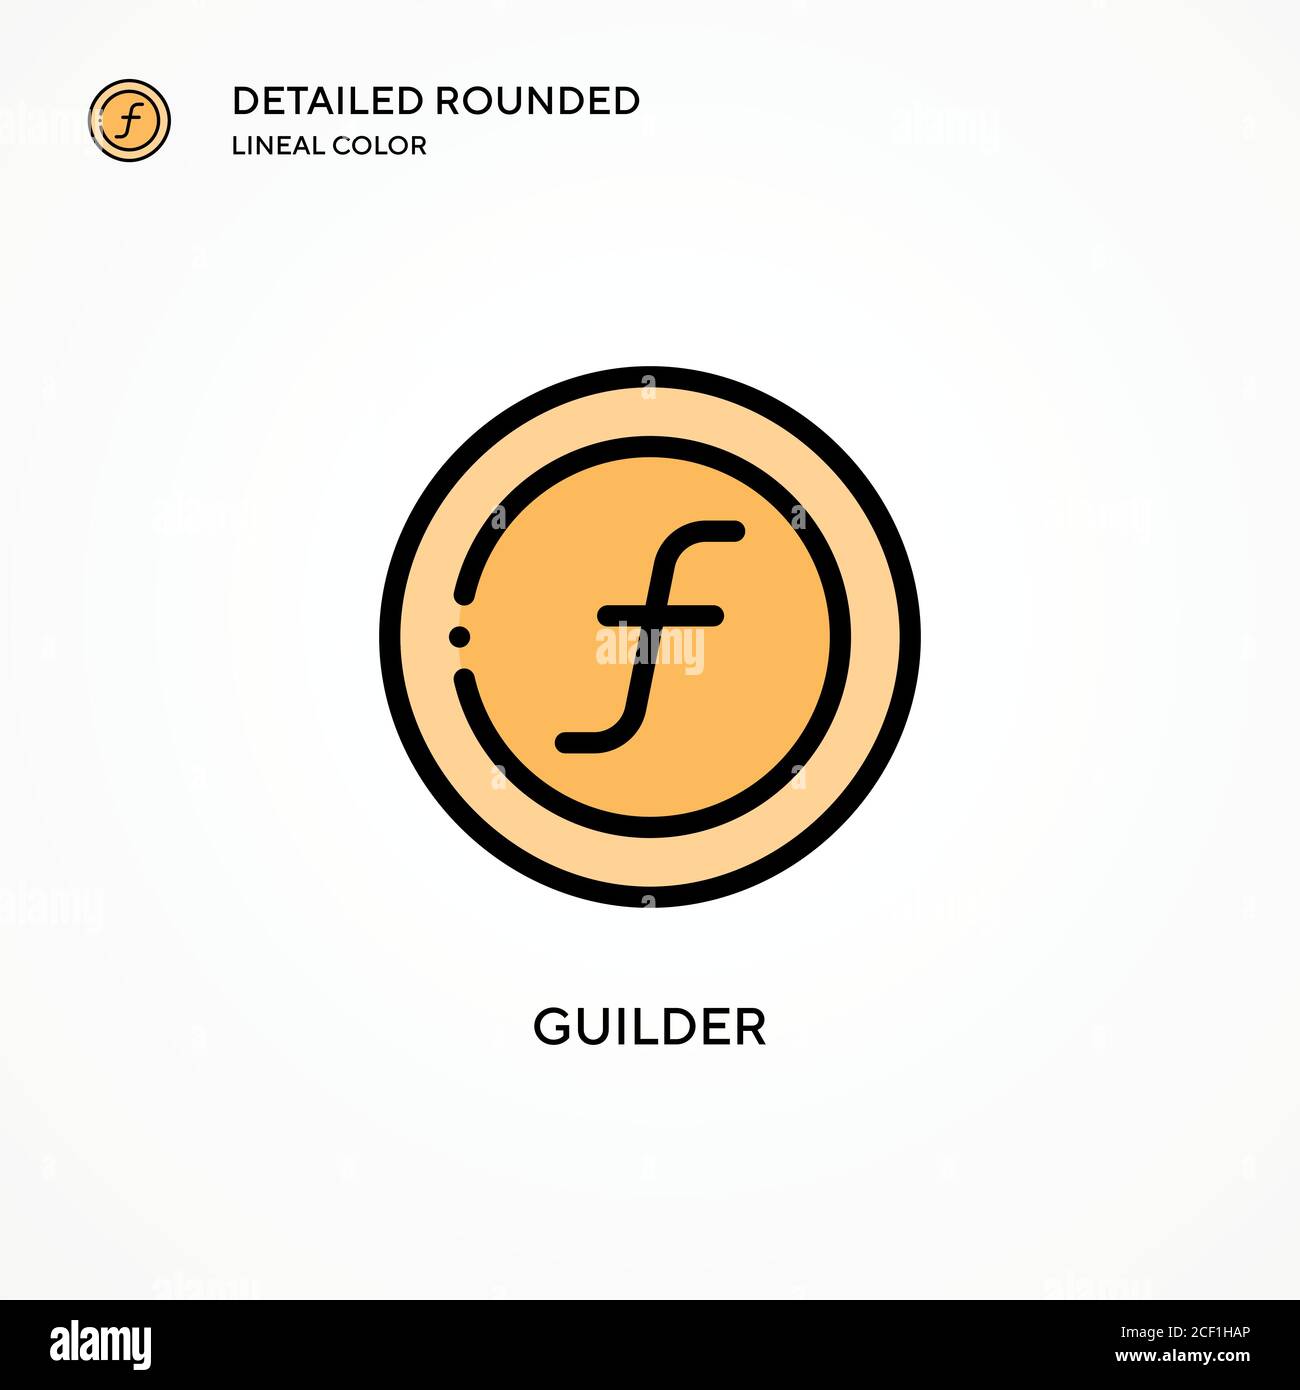 Guilder vector icon. Modern vector illustration concepts. Easy to edit and customize. Stock Vector